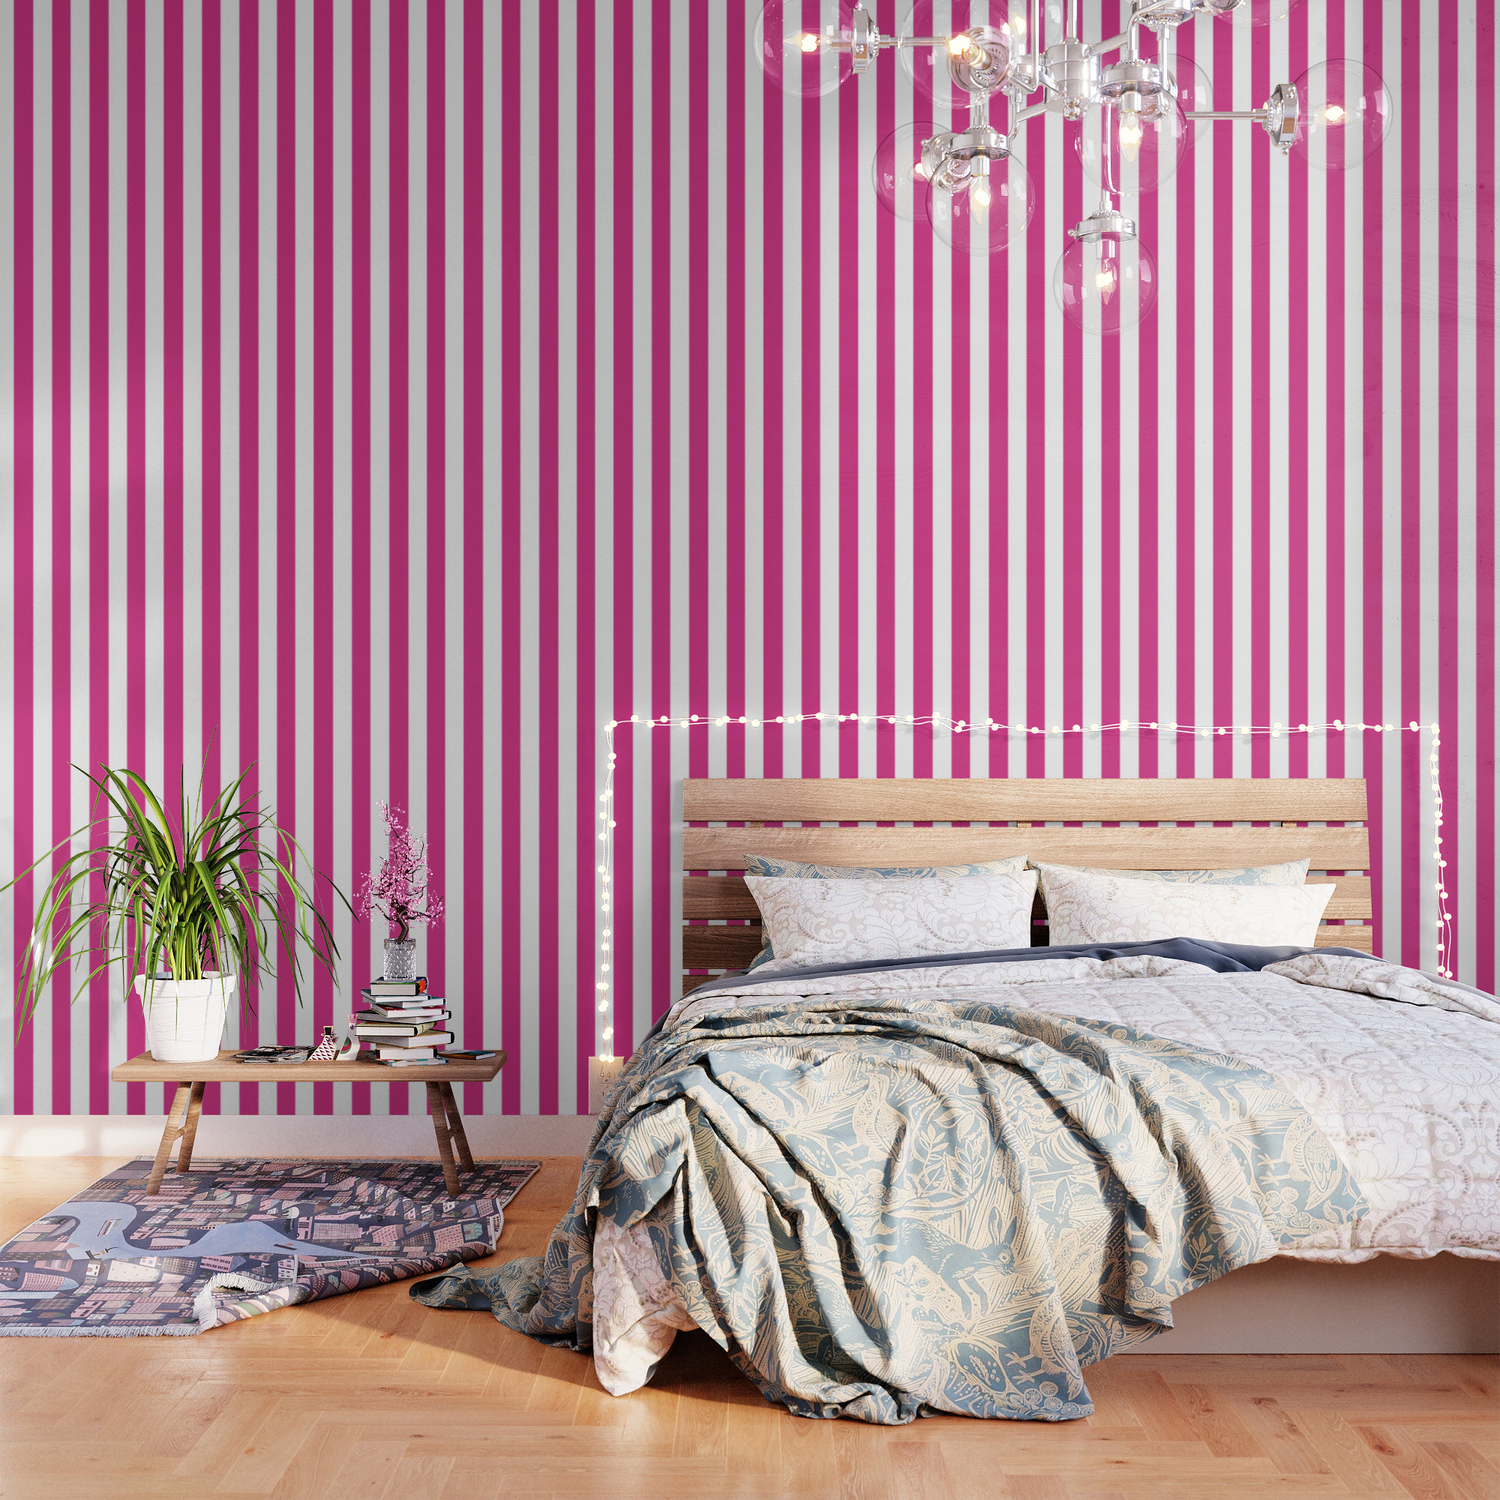 Deep cerise pink - solid color - white vertical lines pattern Wallpaper by  Make it Colorful | Society6